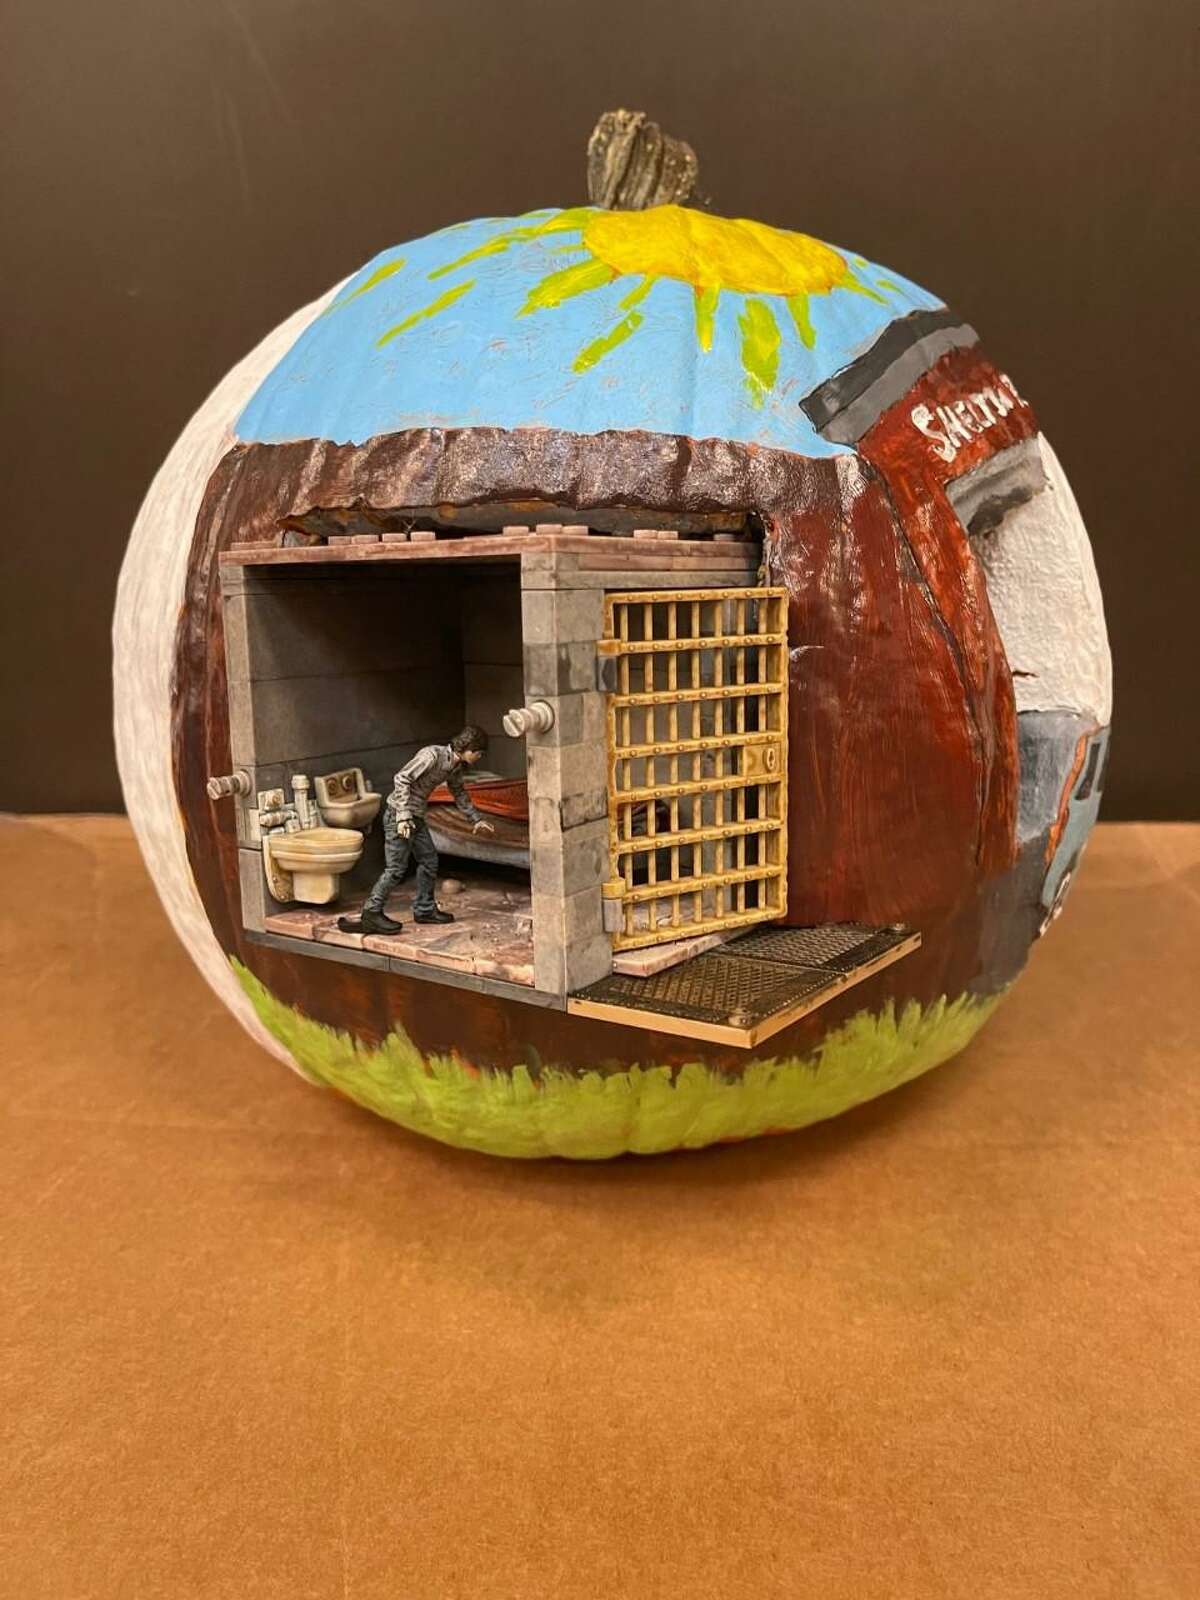 The Shelton Police Department's entry into the Wesley Village Pumpkin Carving Contest. Votes can be cast for the winner through Friday, Oct. 29, 2021.